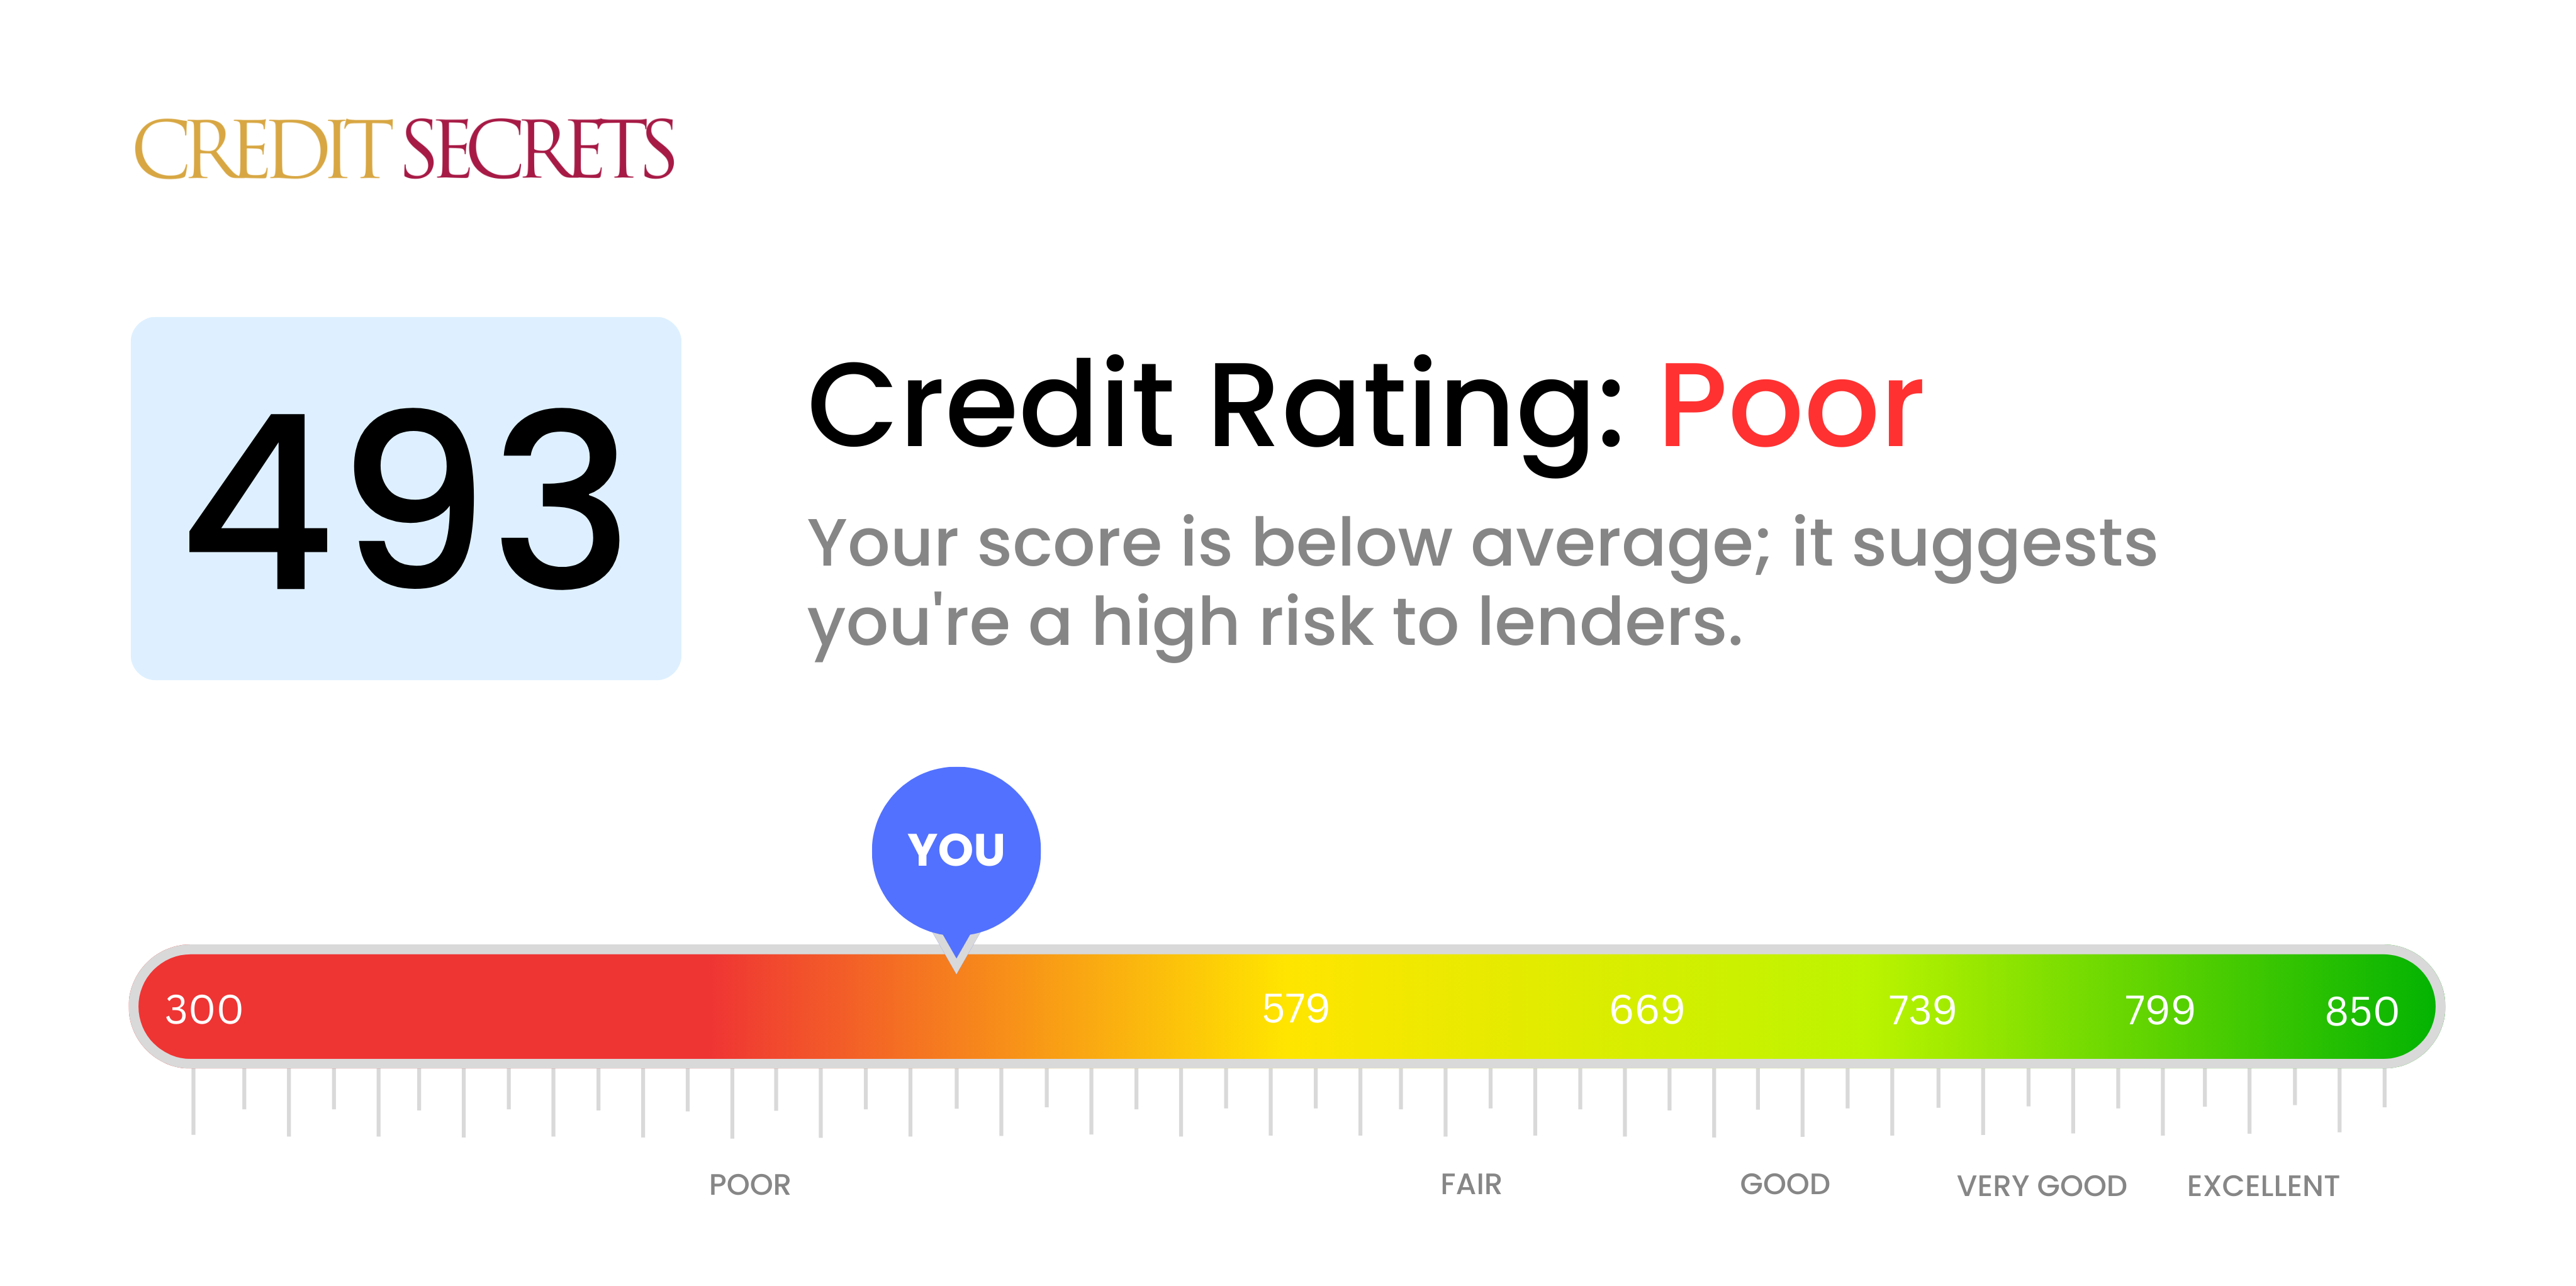 Is 493 a good credit score?